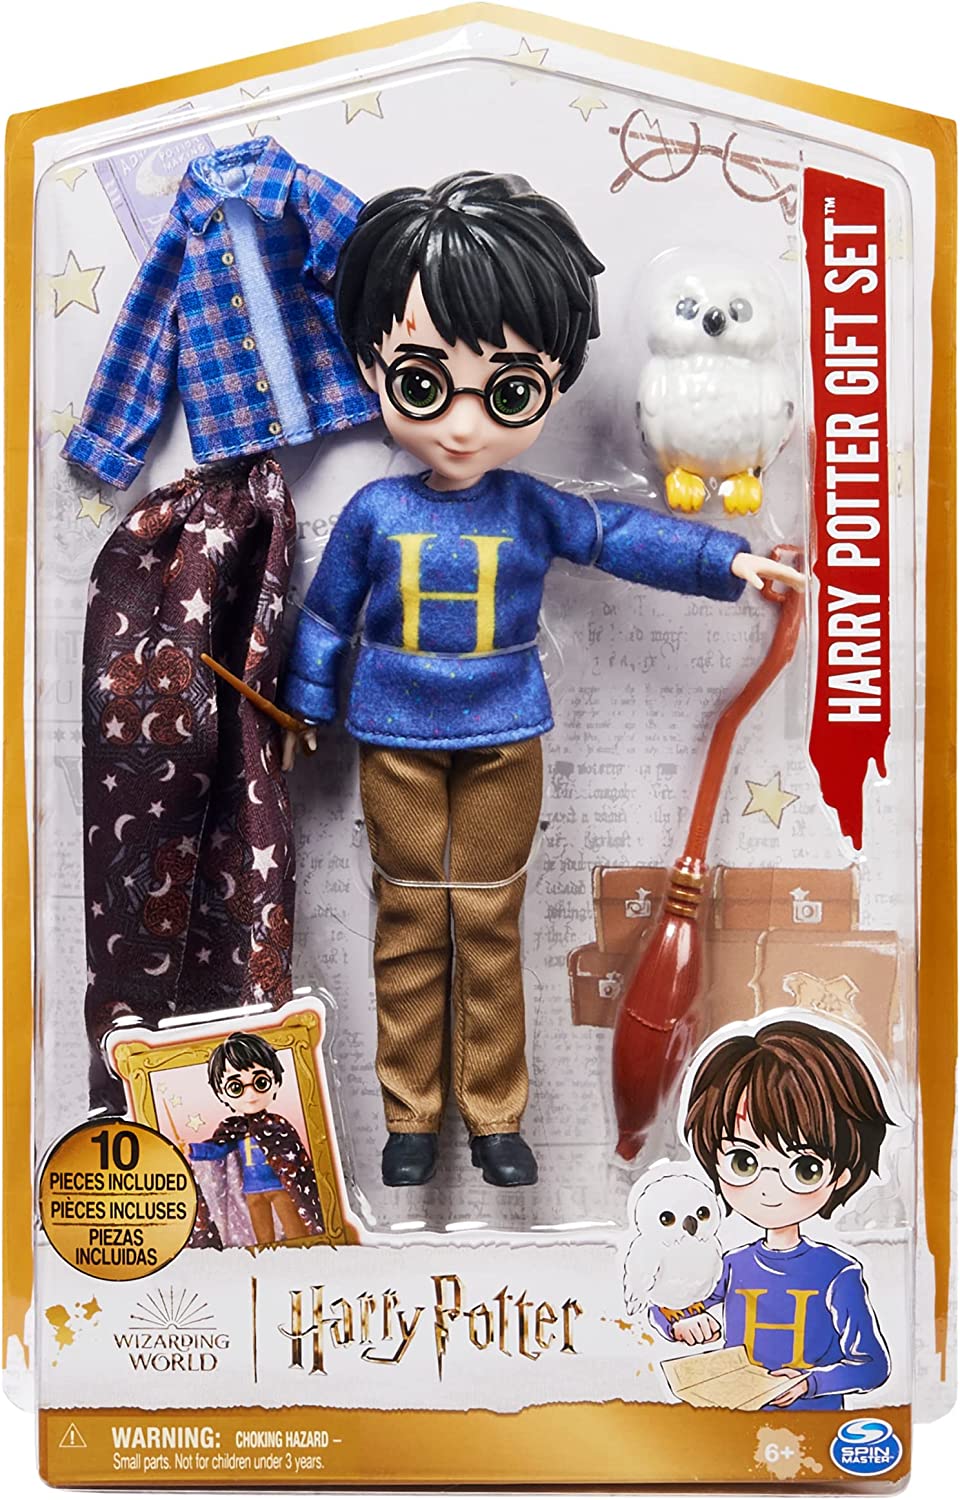 Details about   Harry Potter Mattel Wizarding World poseable figures you choose NEW,sealed box 